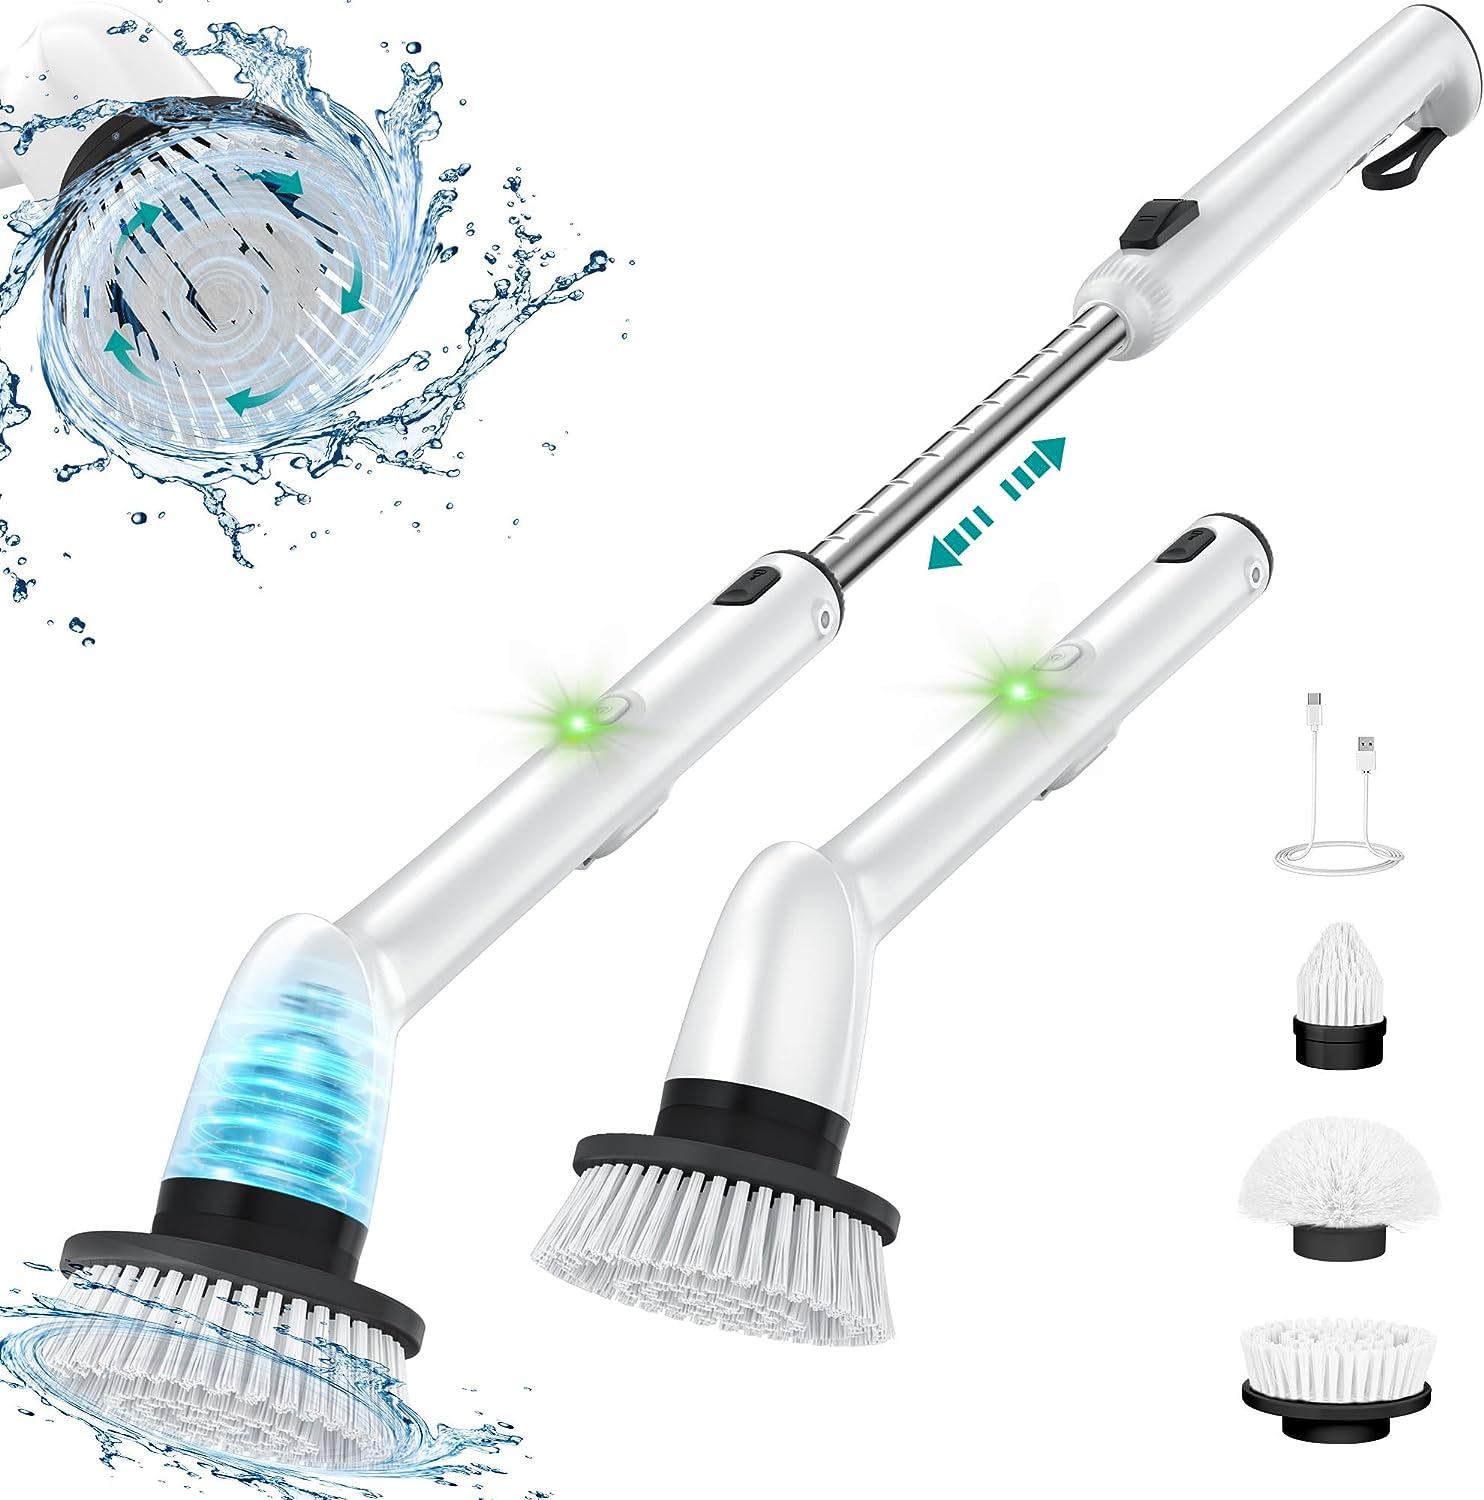 Cordless Electric Spin Scrubber Brush Cleaning Set for Kitchen